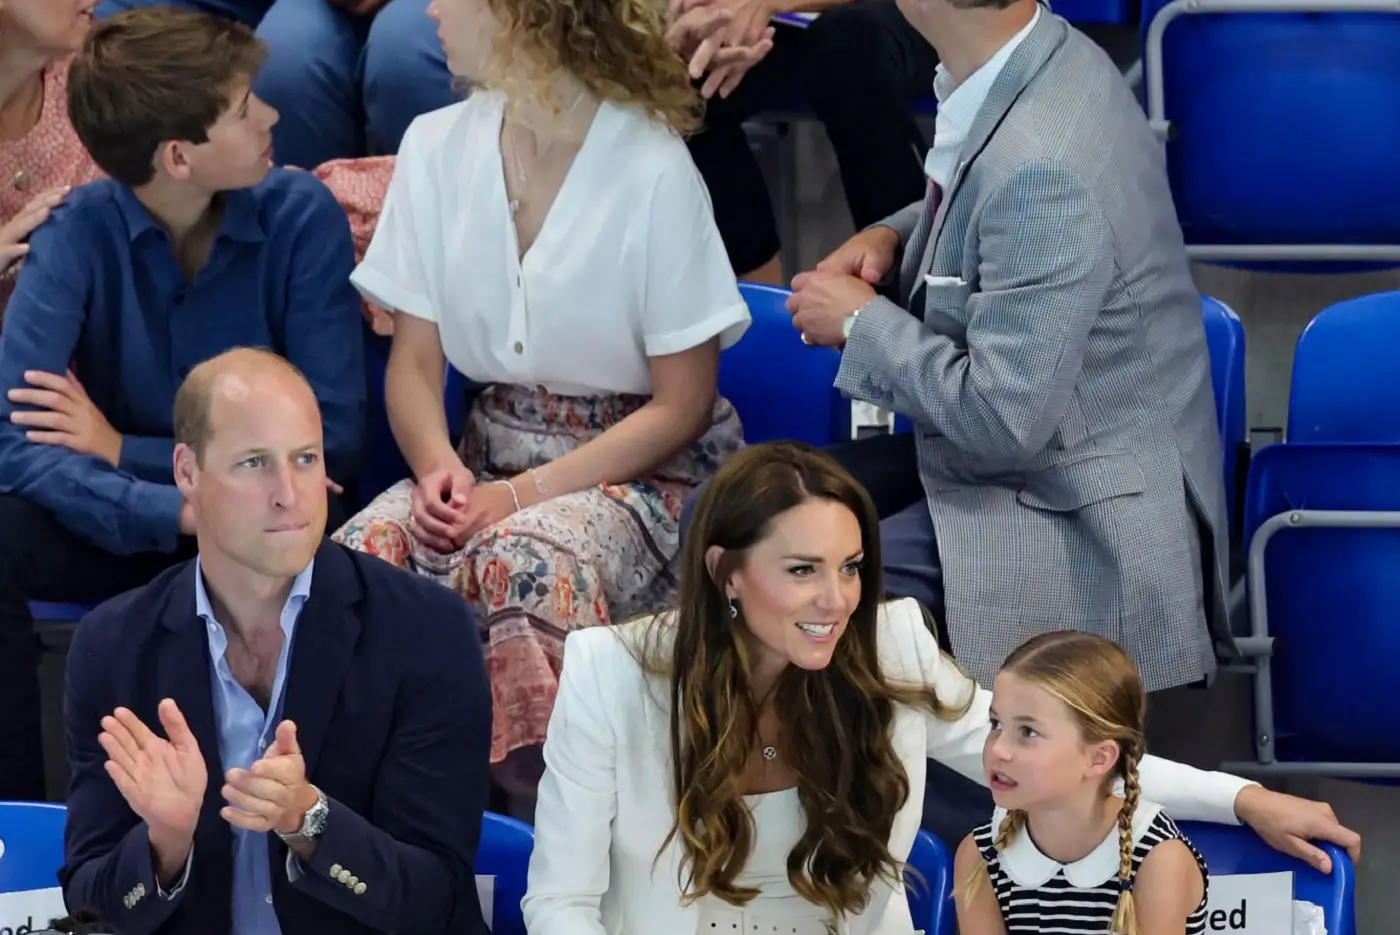 The Duke and Duchess of Cambridge attended commonwealth games with Princess Charlotte